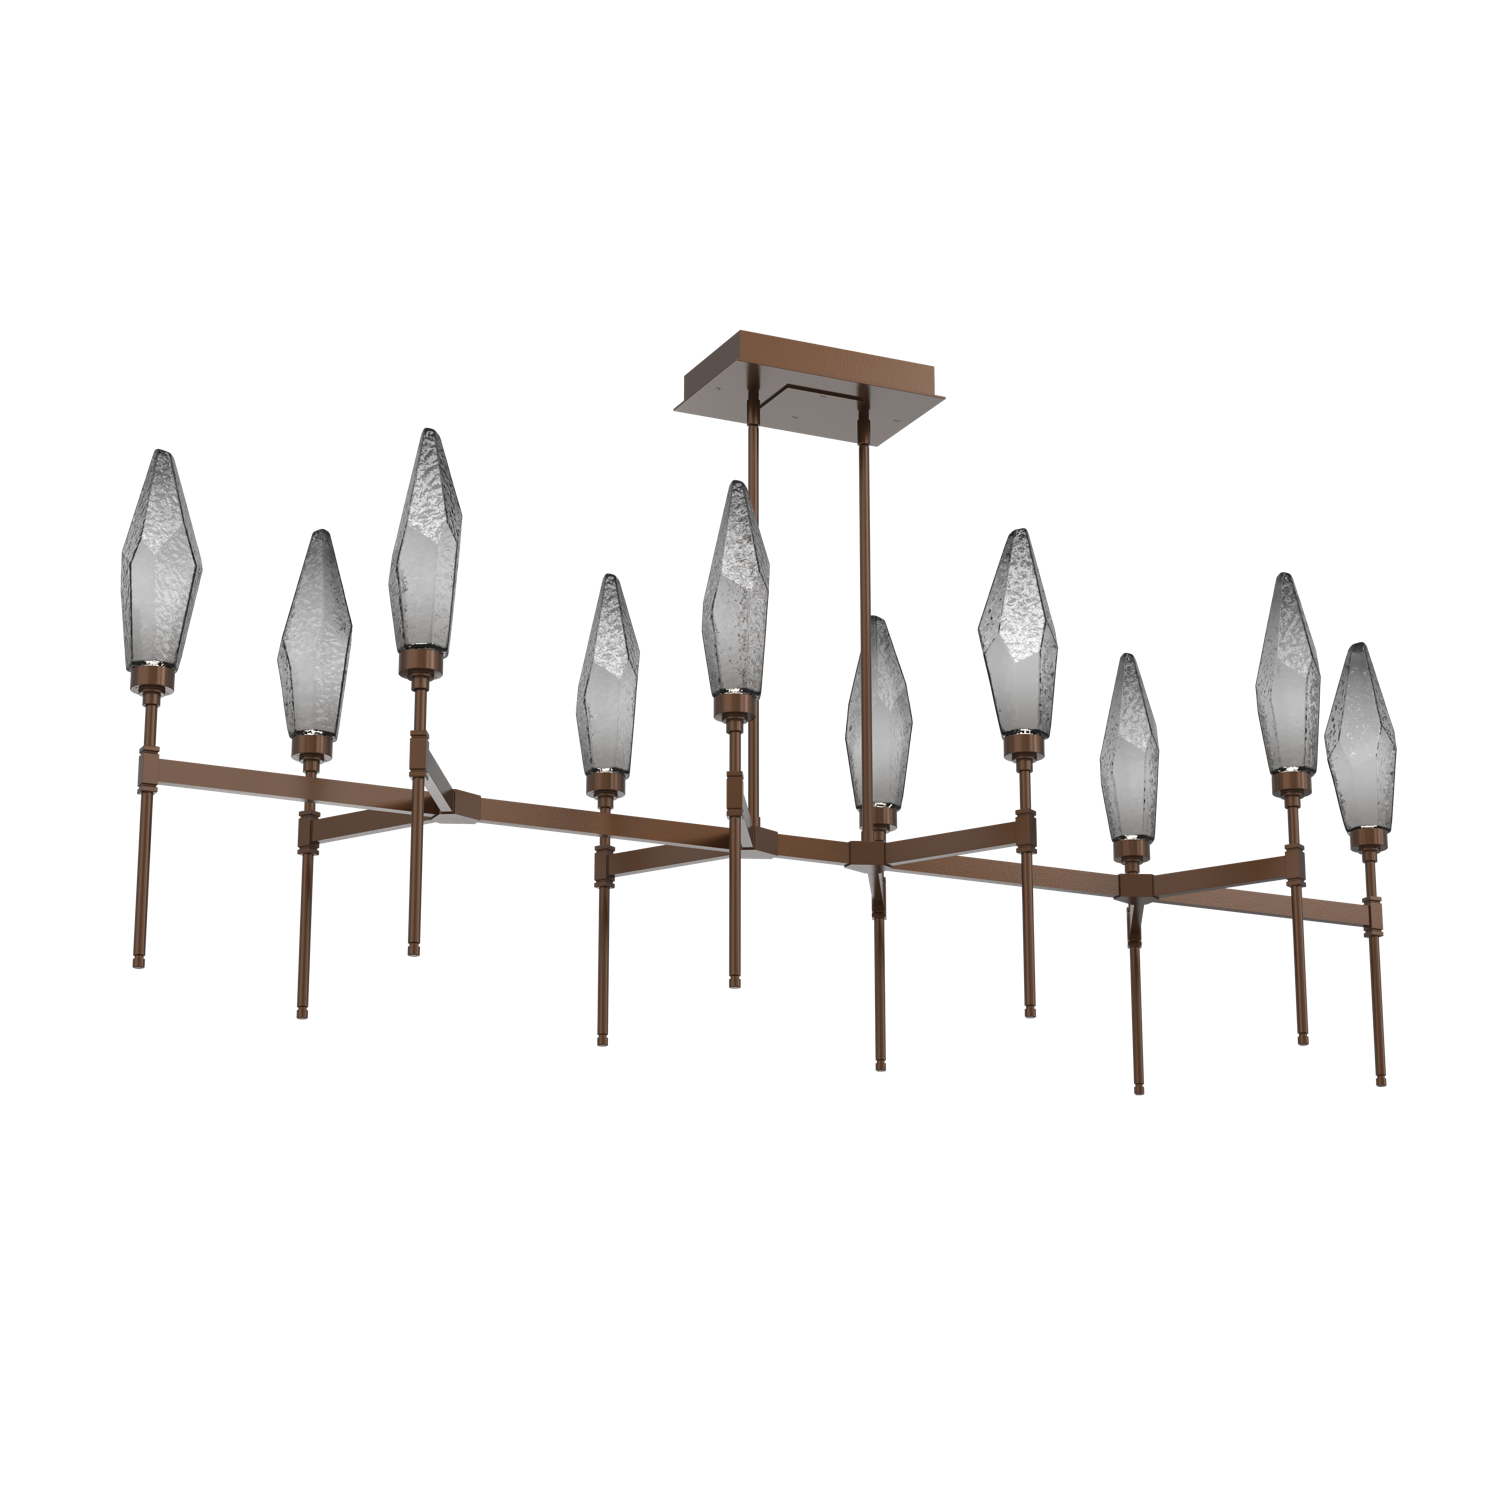 PLB0050-67-BB-CS-Hammerton-Studio-Rock-Crystal-67-inch-linear-belvedere-chandelier-with-burnished-bronze-finish-and-chilled-smoke-glass-shades-and-LED-lamping